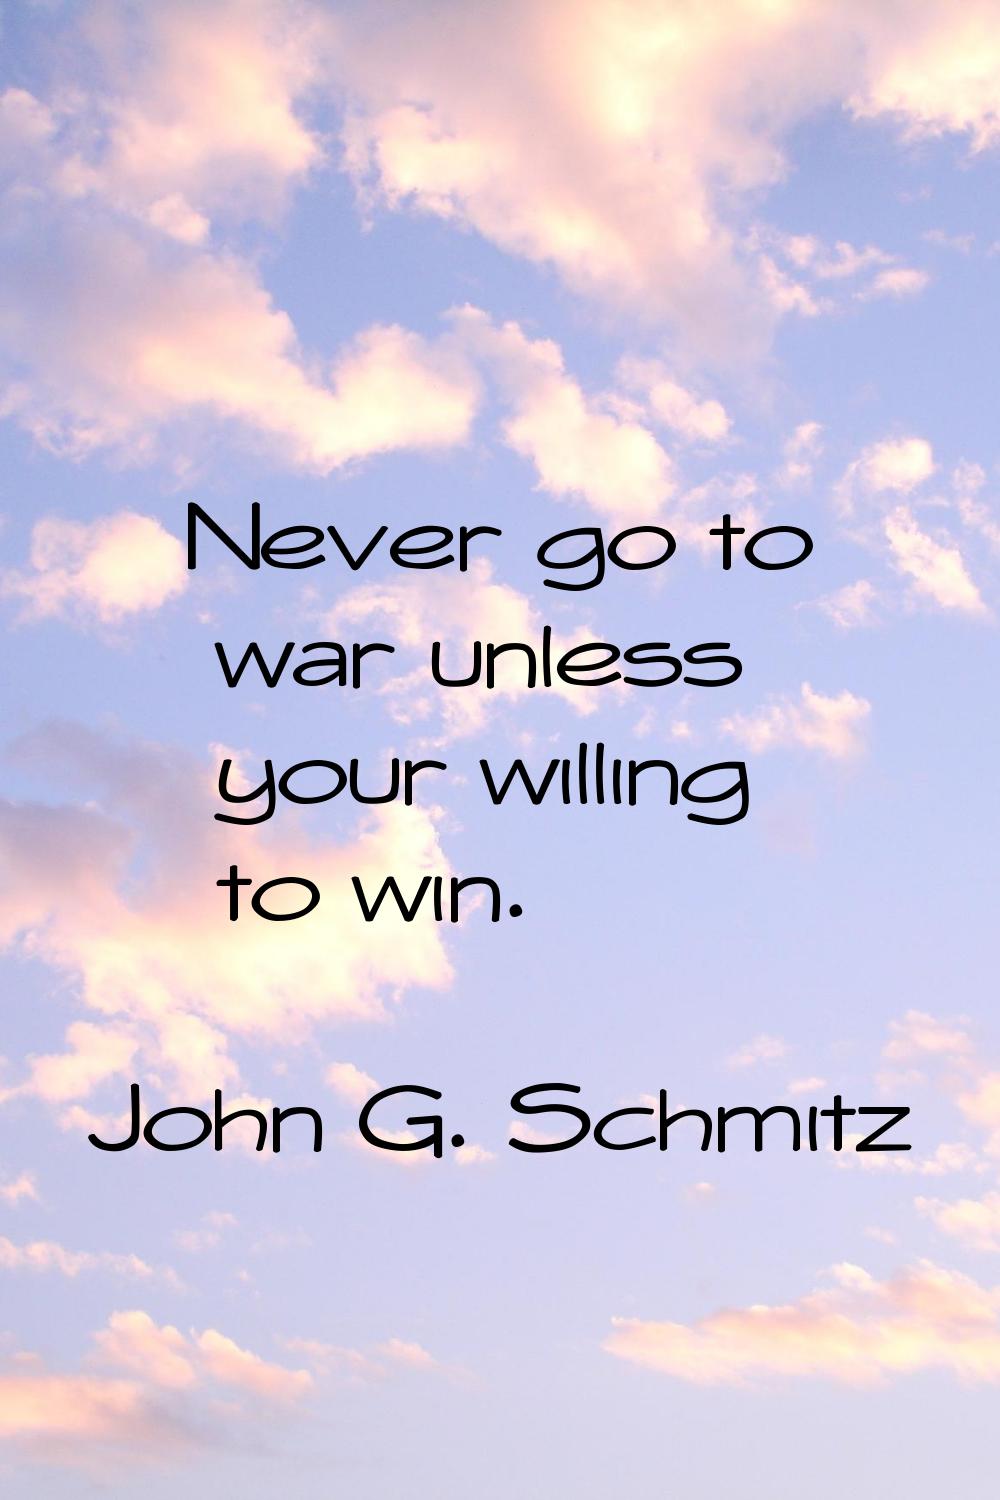 Never go to war unless your willing to win.